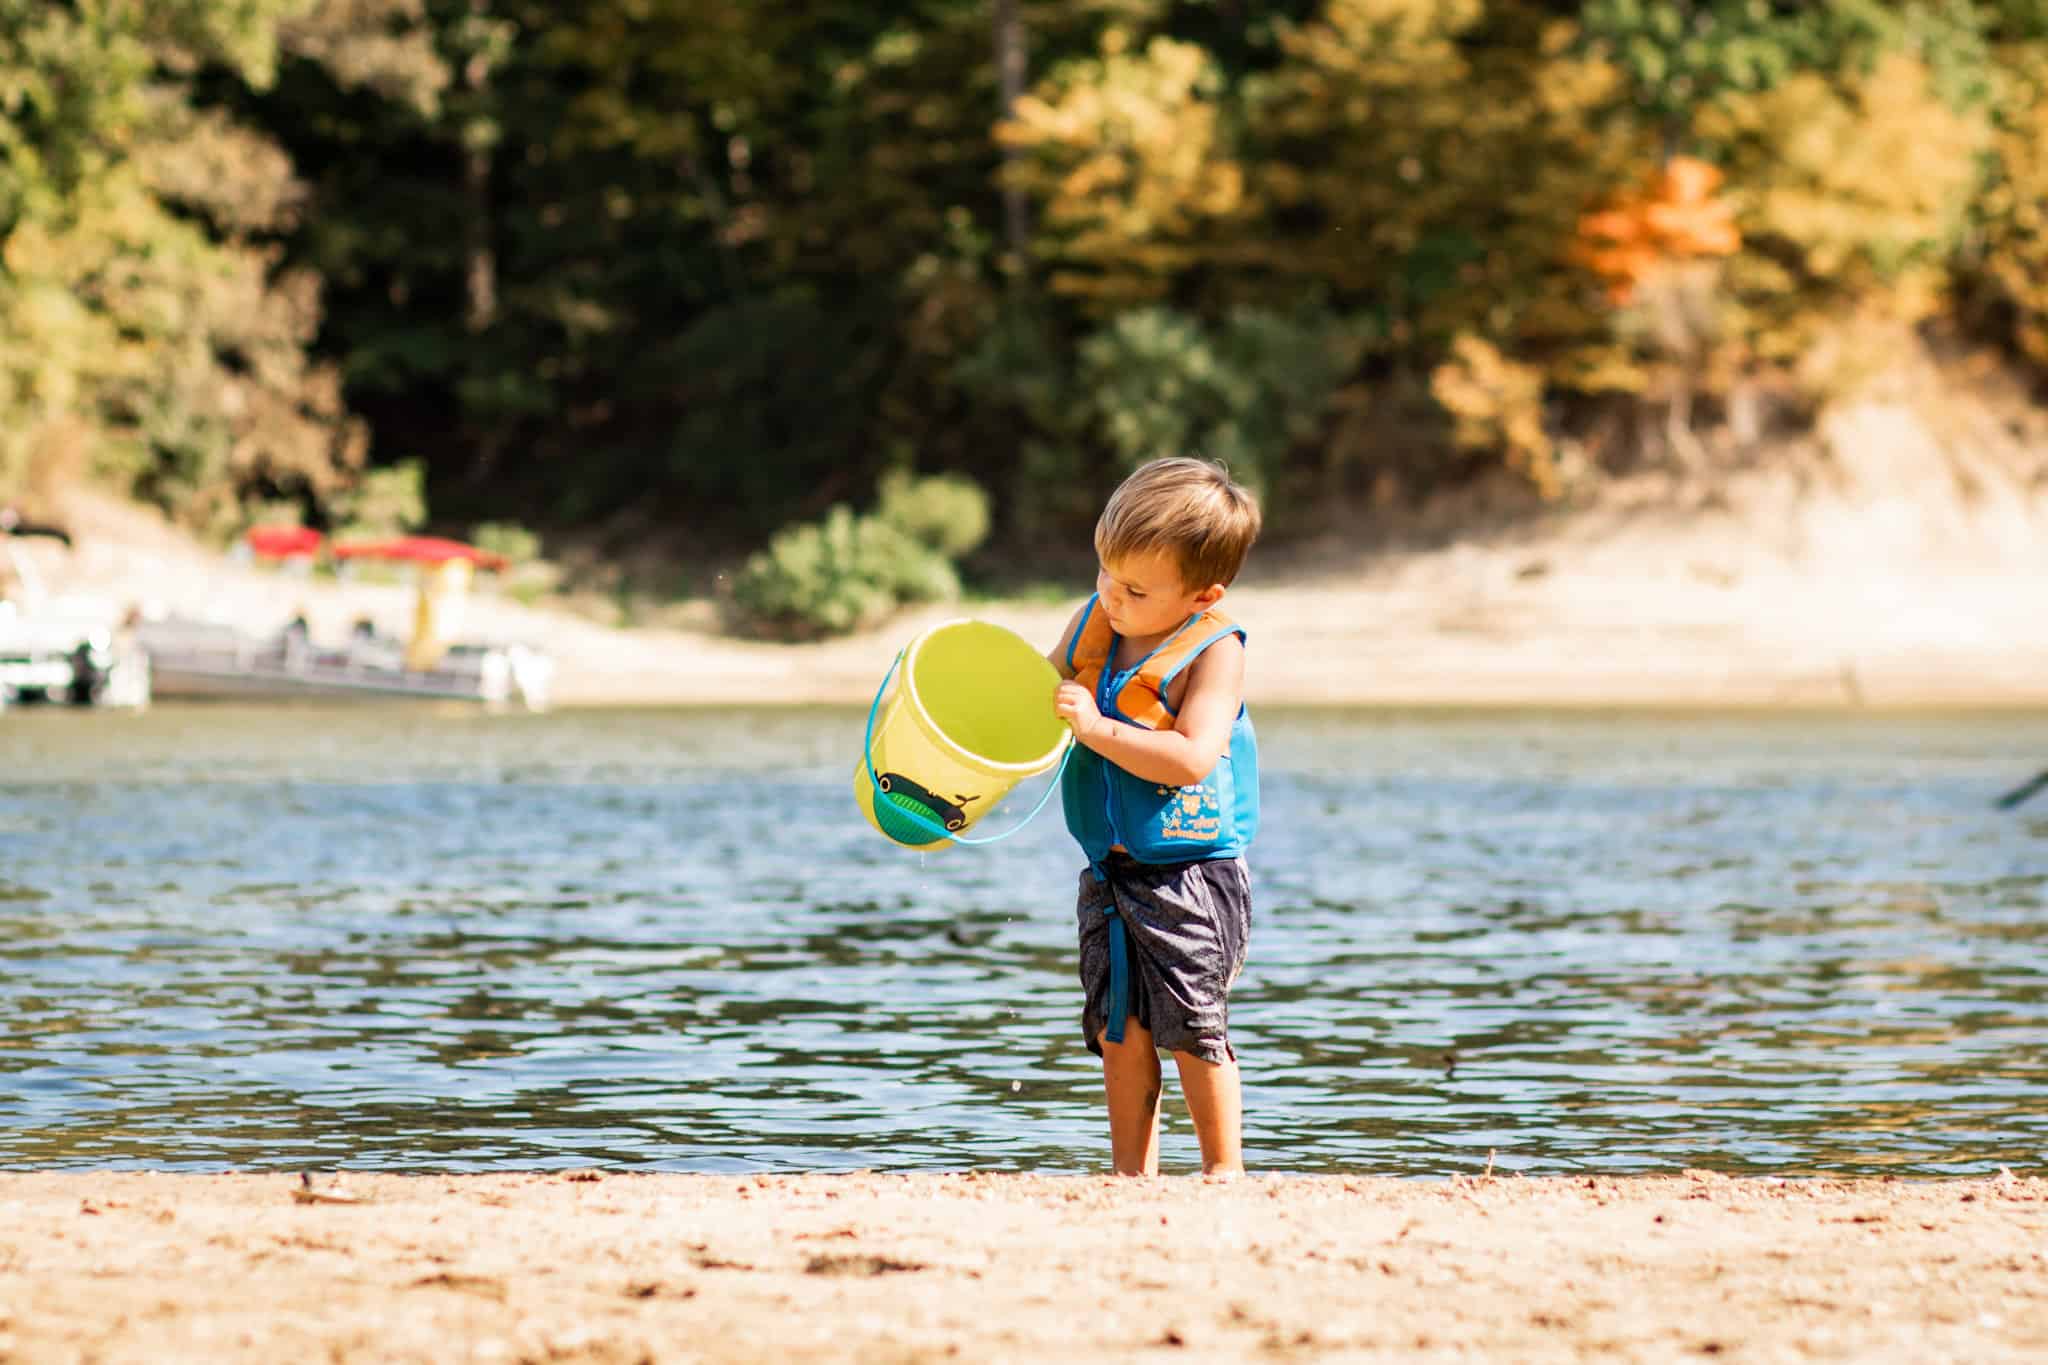 How To Choose The Safest Life Jacket For Your Kids This Summer - NDPA